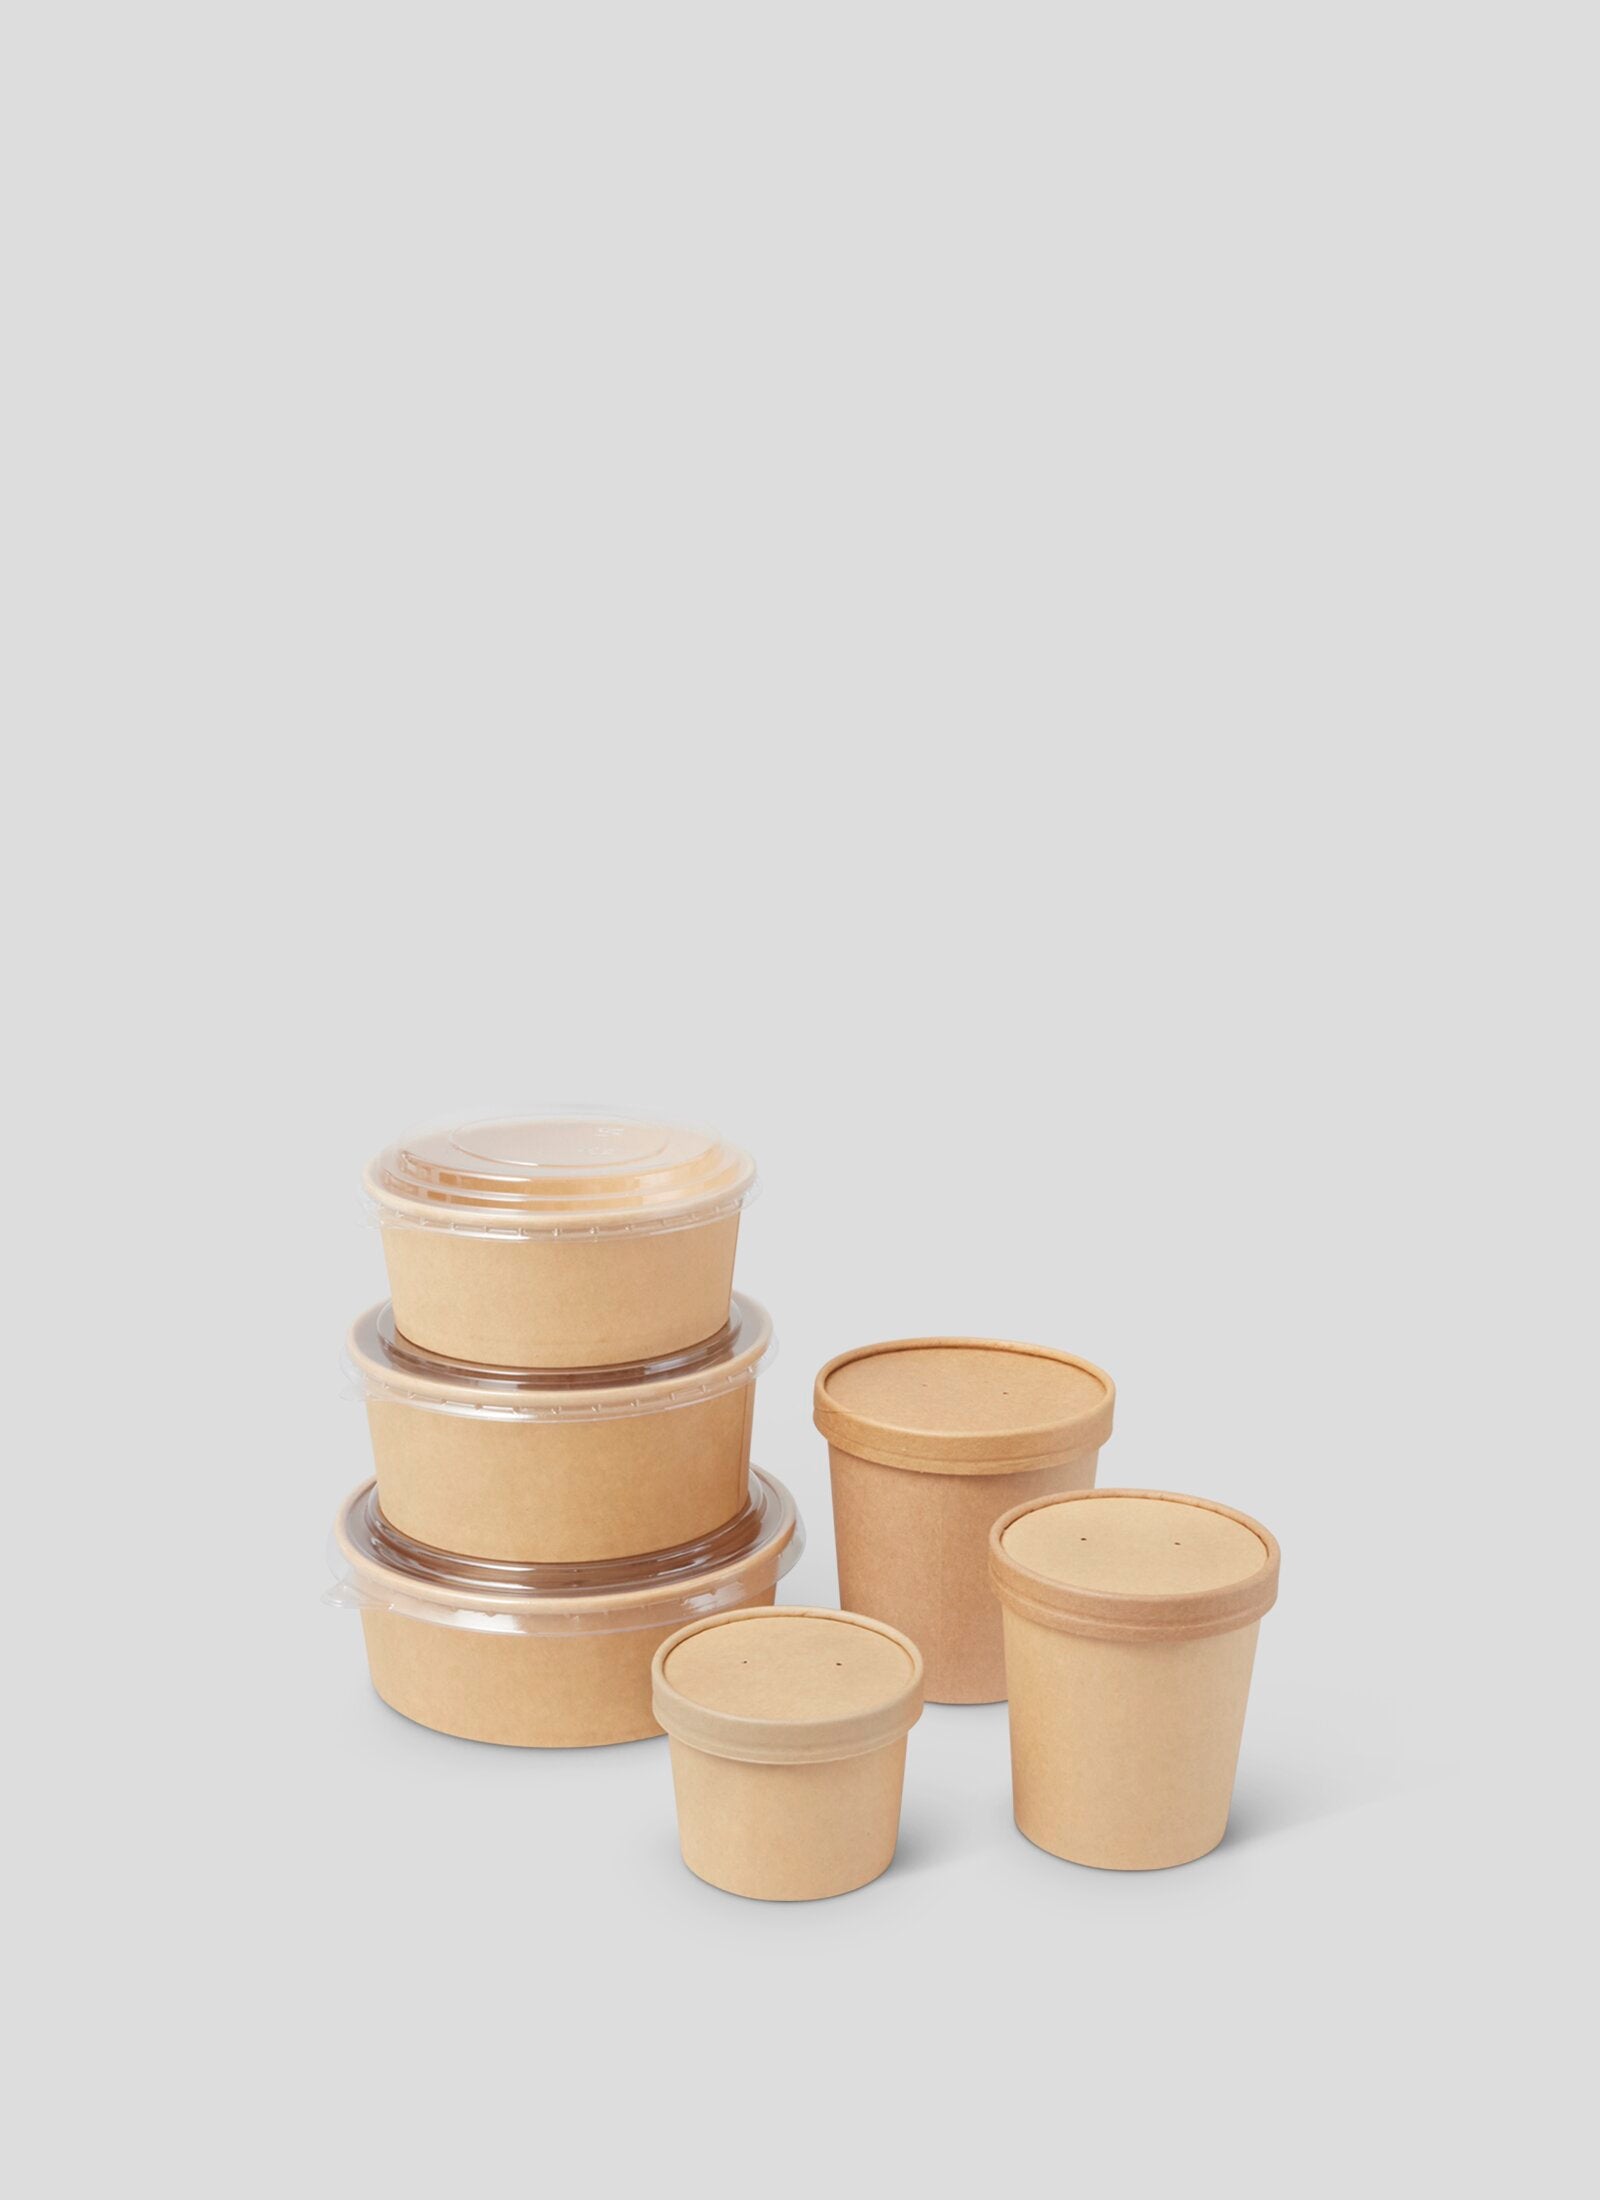 Sustainable Packaging Round Bowls and Lids for to go orders 